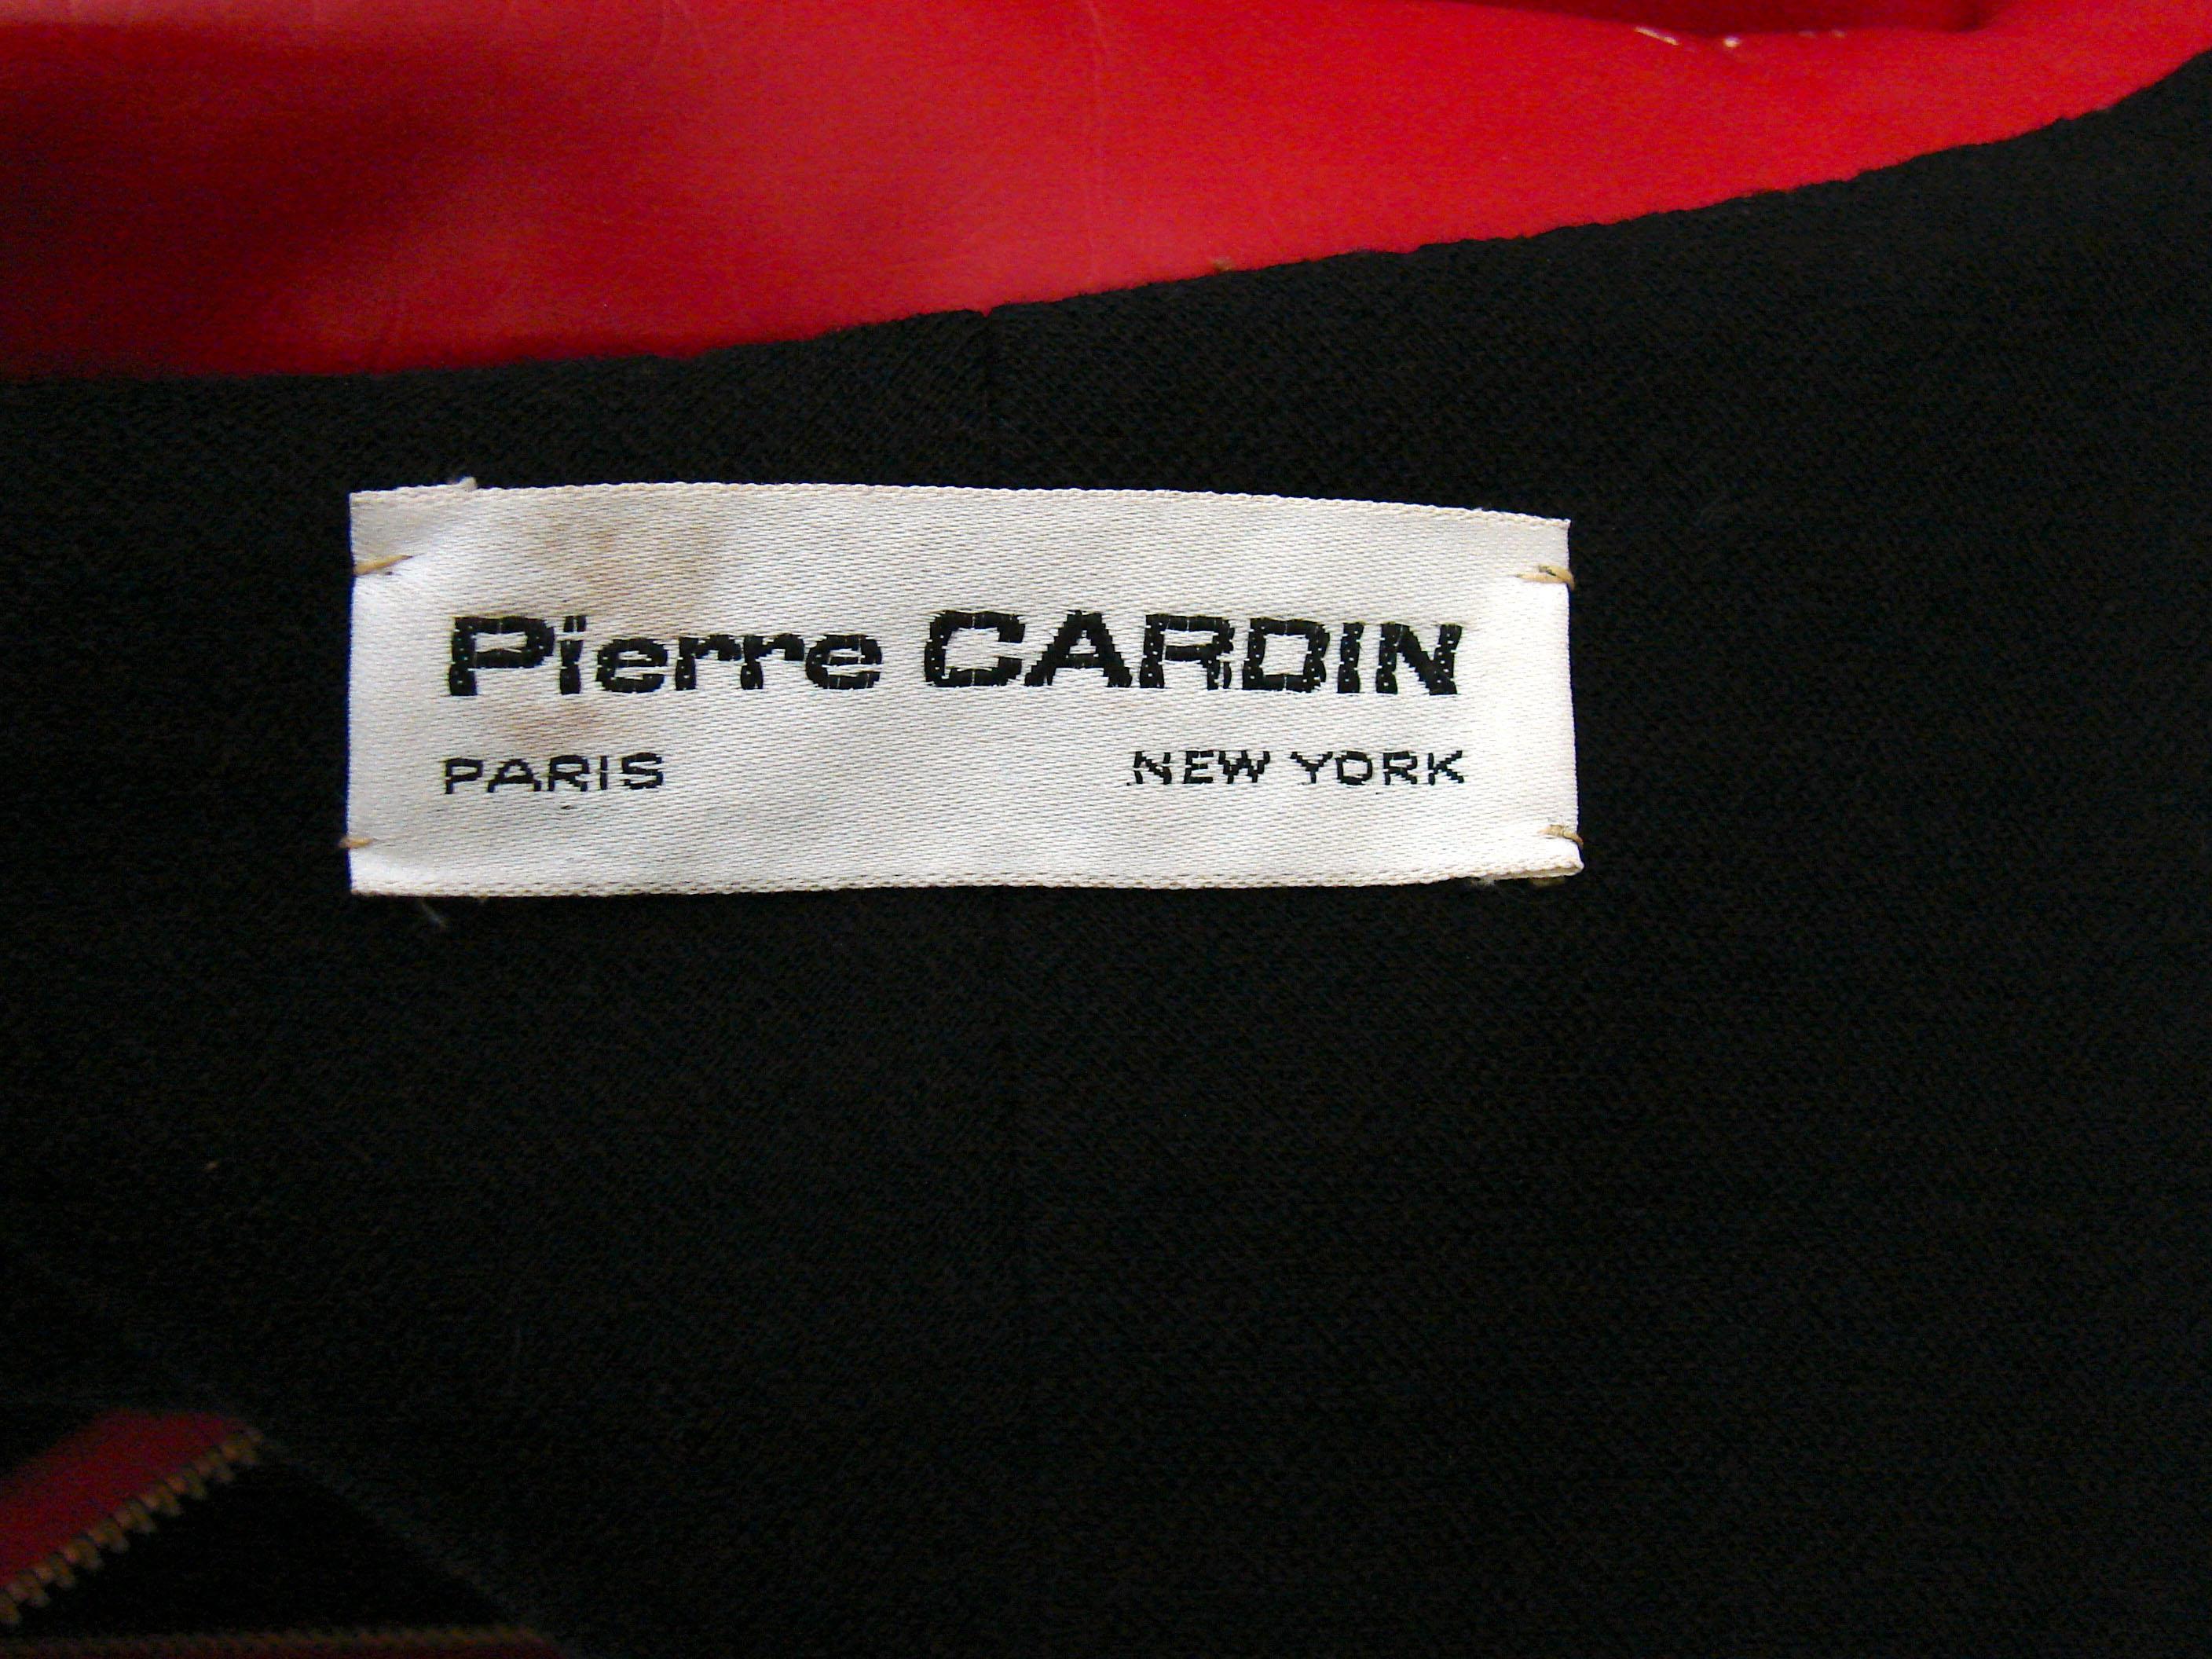 Pierre Cardin Space Age and Futurism Collection Red Vinyl Cape, 1960s  1